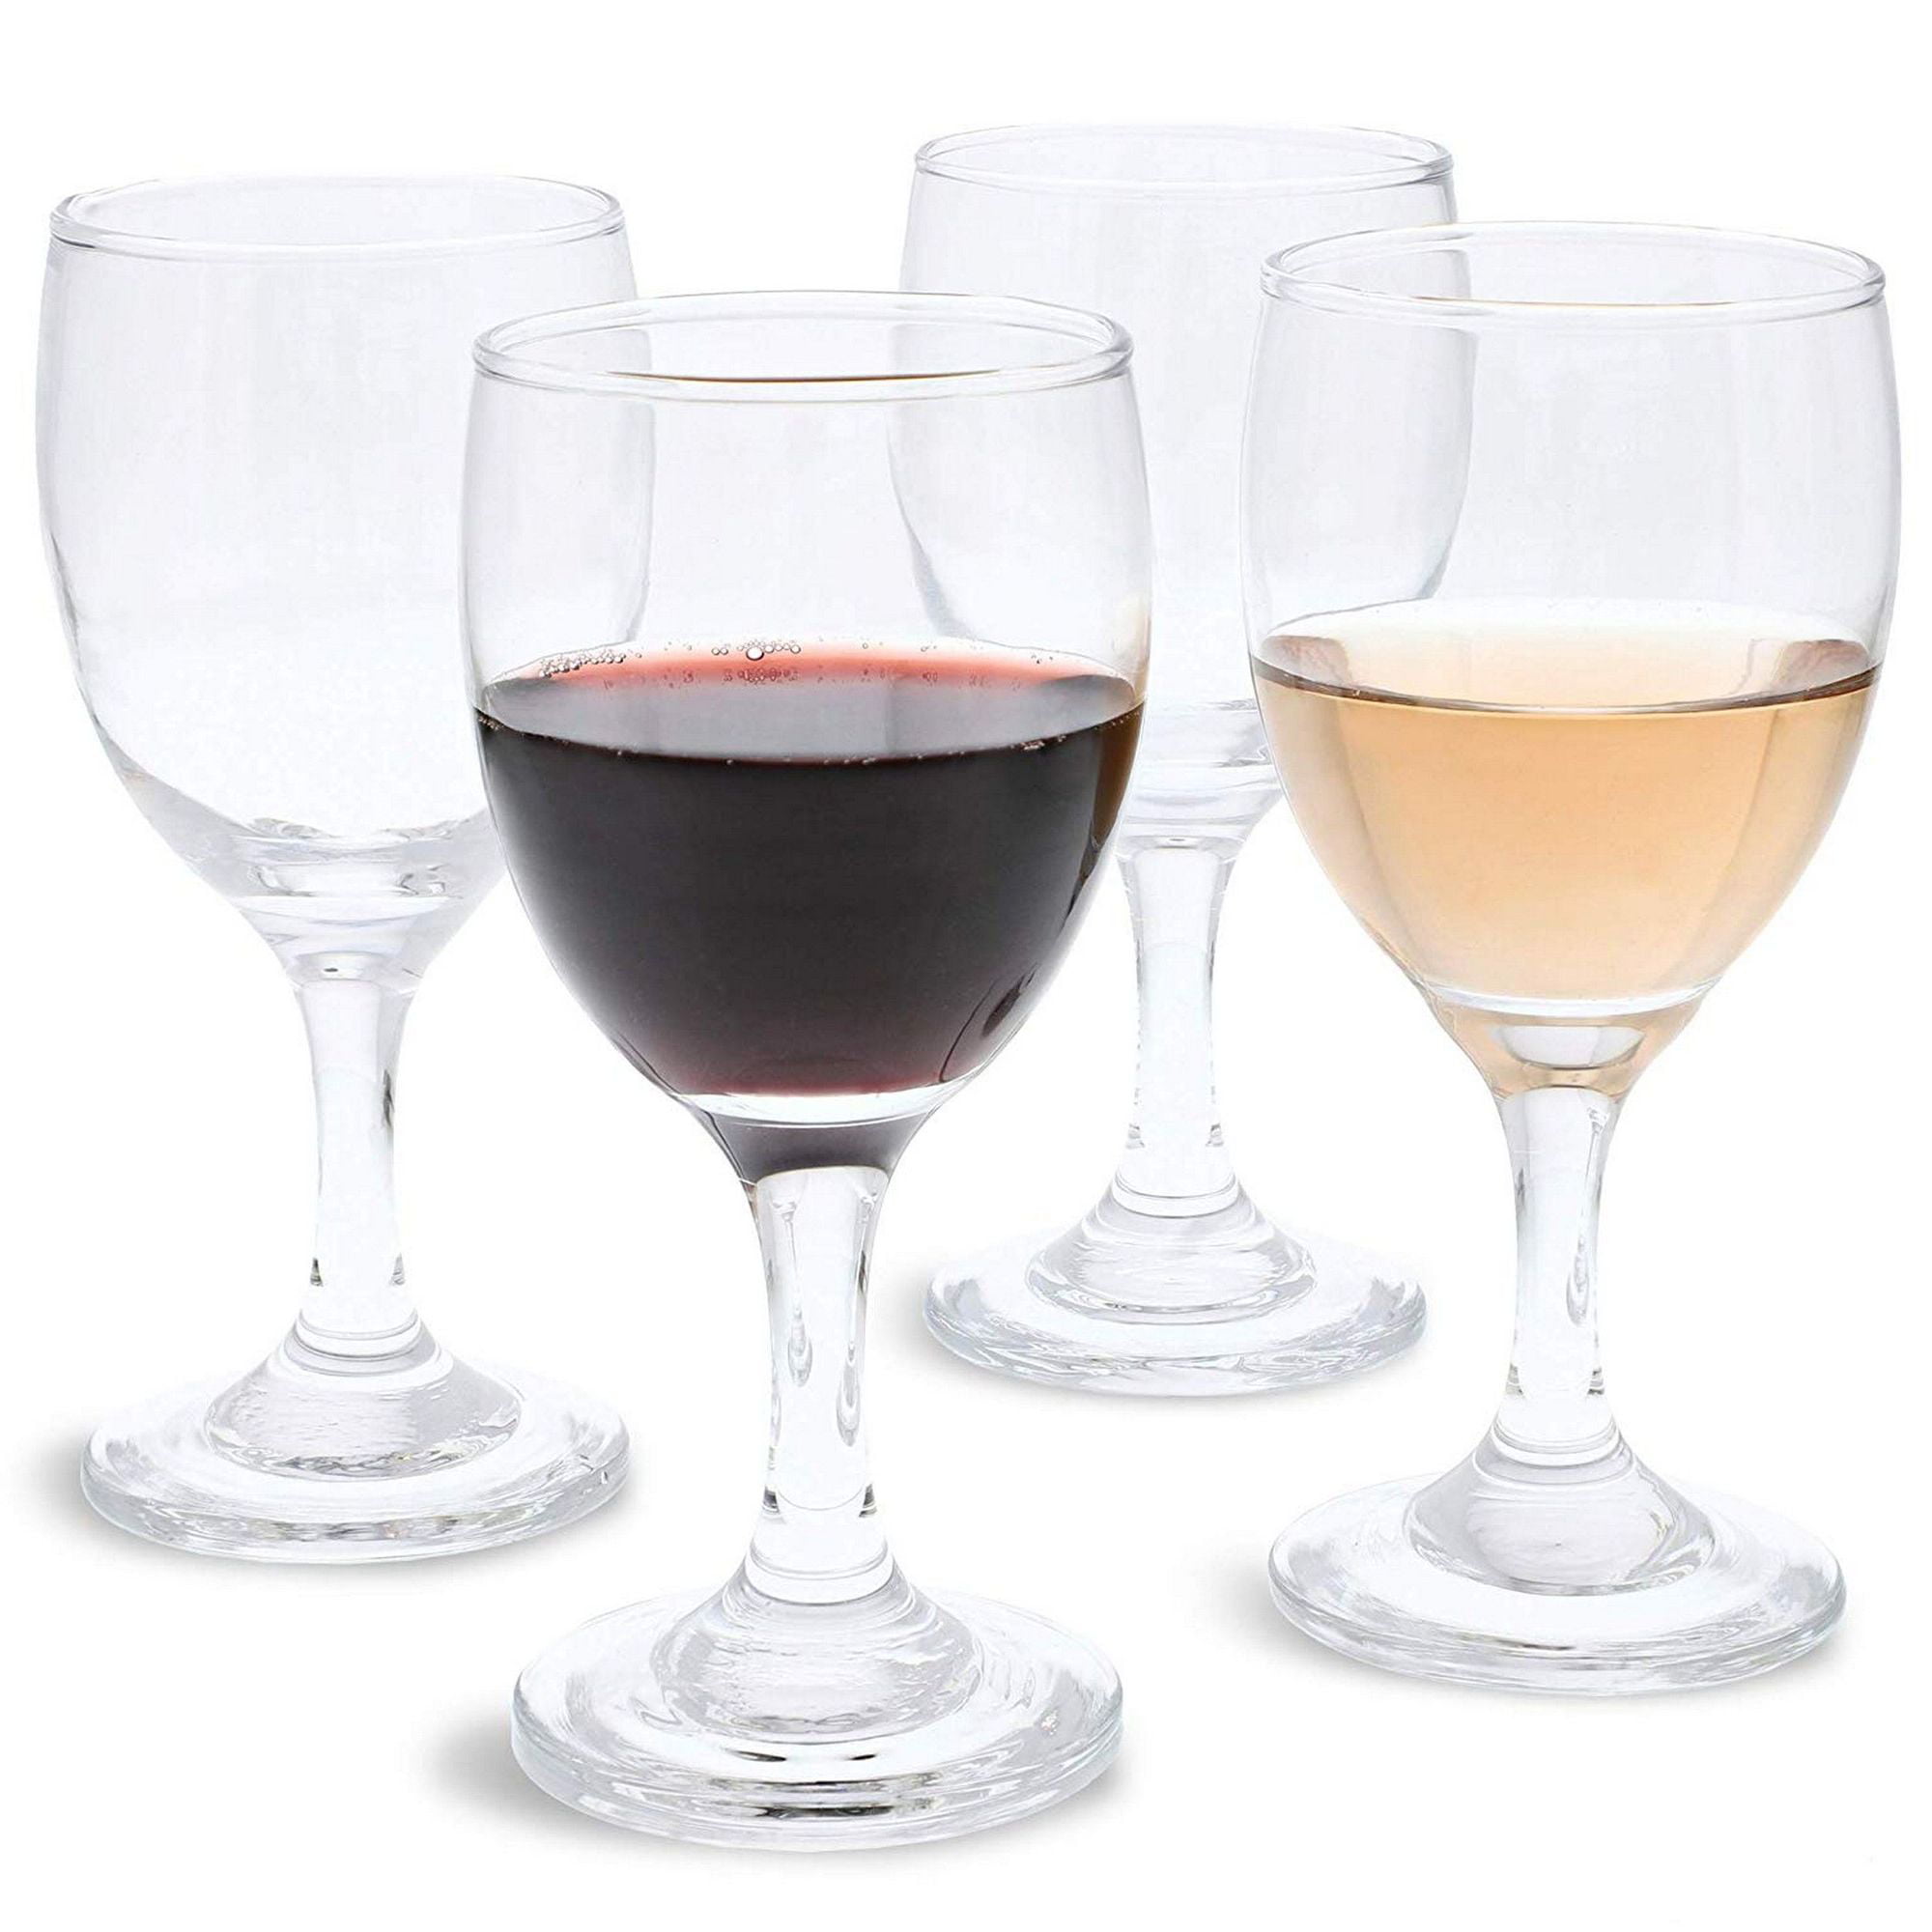 Set Of 4 Small Clear Glass Stemmed Wine Glasses 4 5 Ounces Walmart